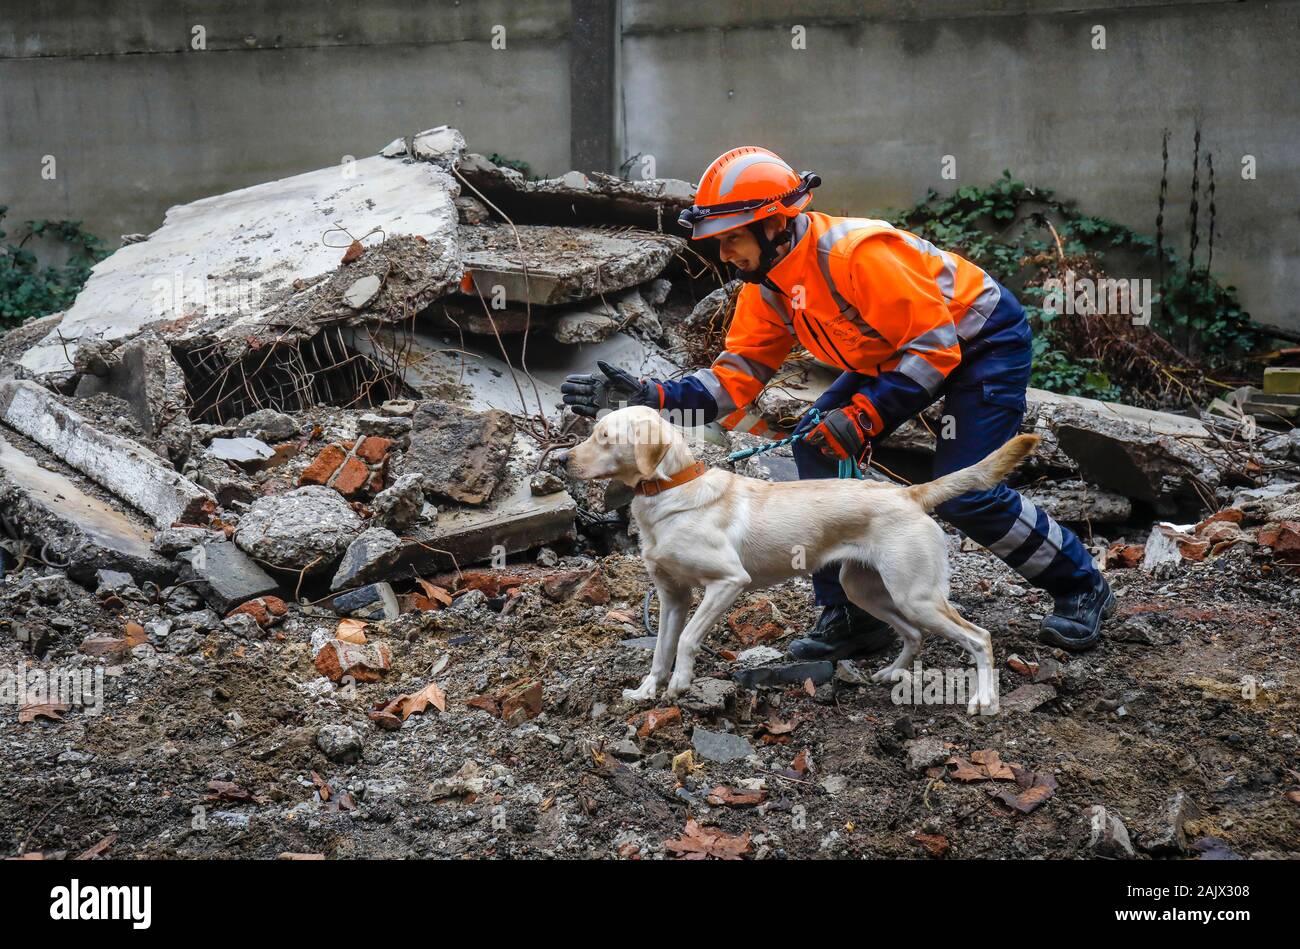 Herne, North Rhine-Westphalia, Germany - Rescue dog training, in ruins of collapsed buildings, the tracking dogs practice the search for injured, buri Stock Photo